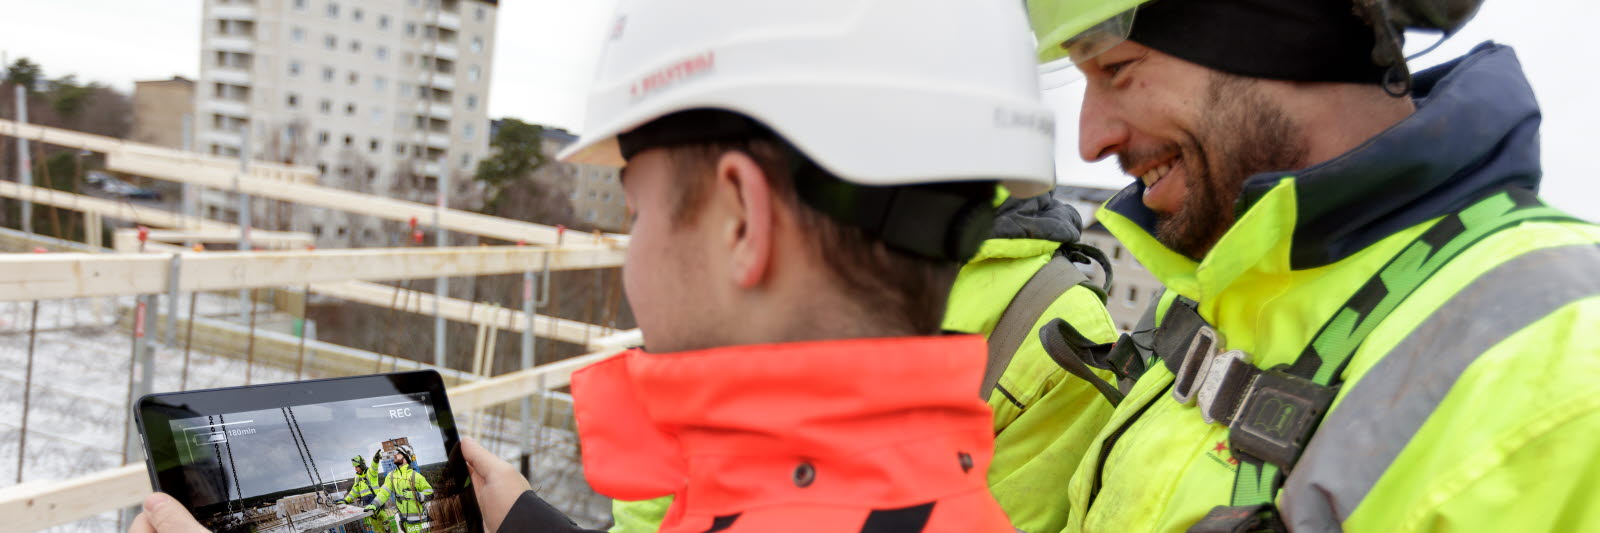 Person using eye tracking for safety assessment on a construction site